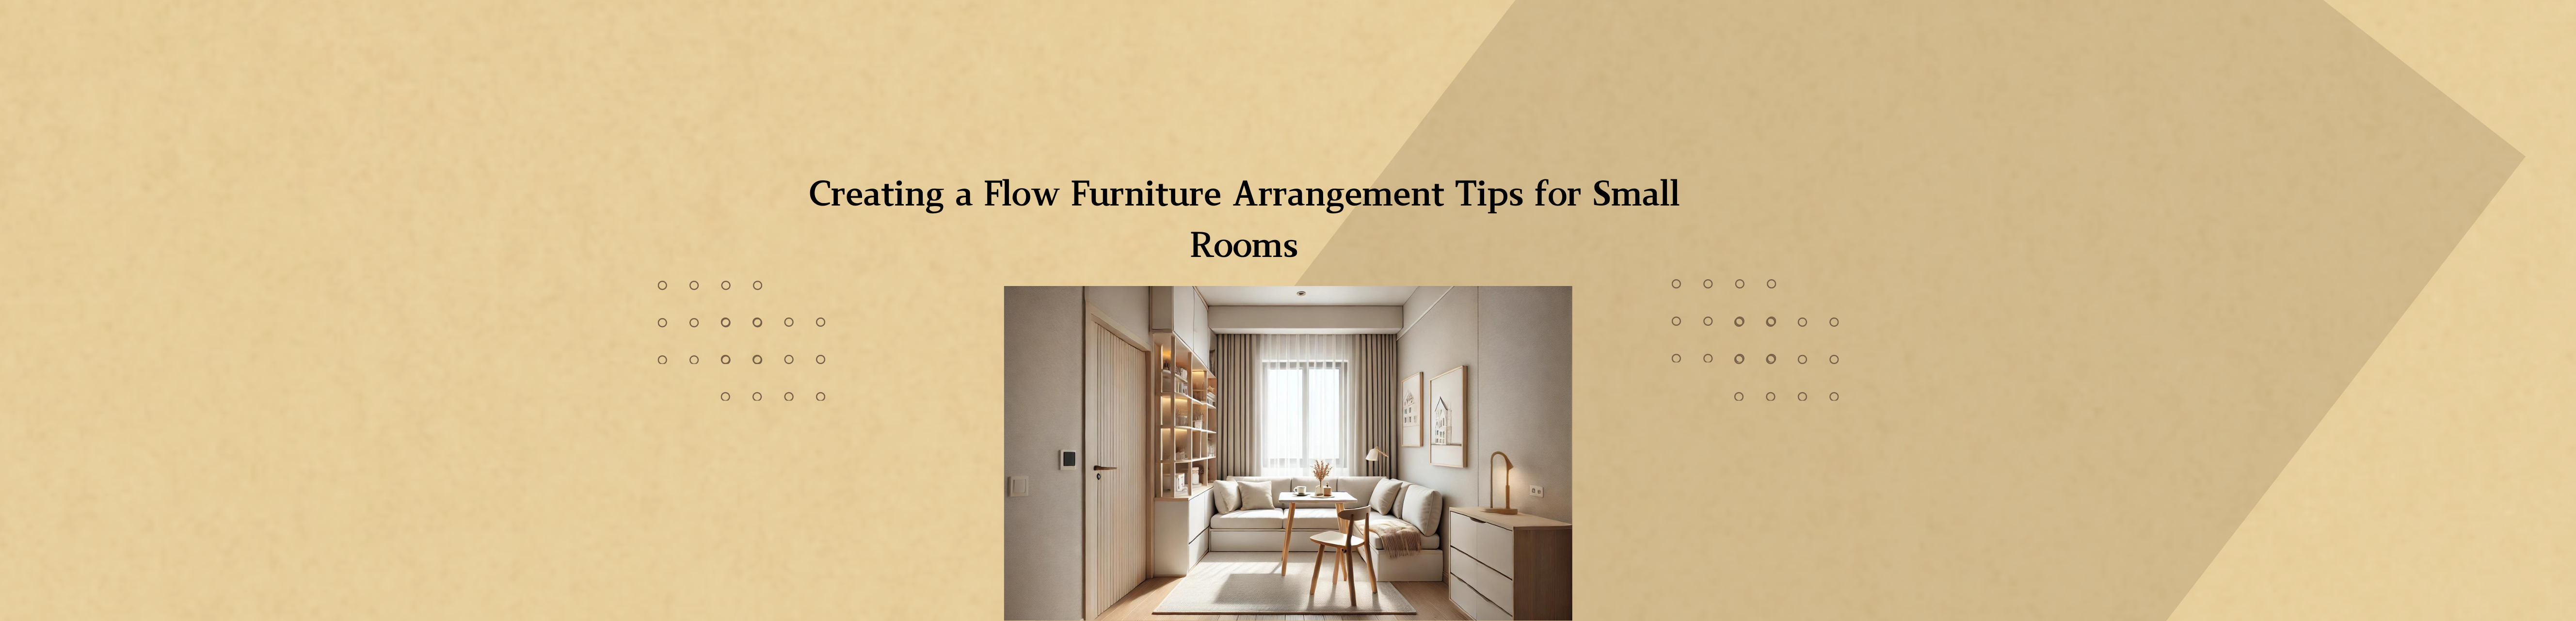 Creating a Flow Furniture Arrangement Tips for Small Rooms